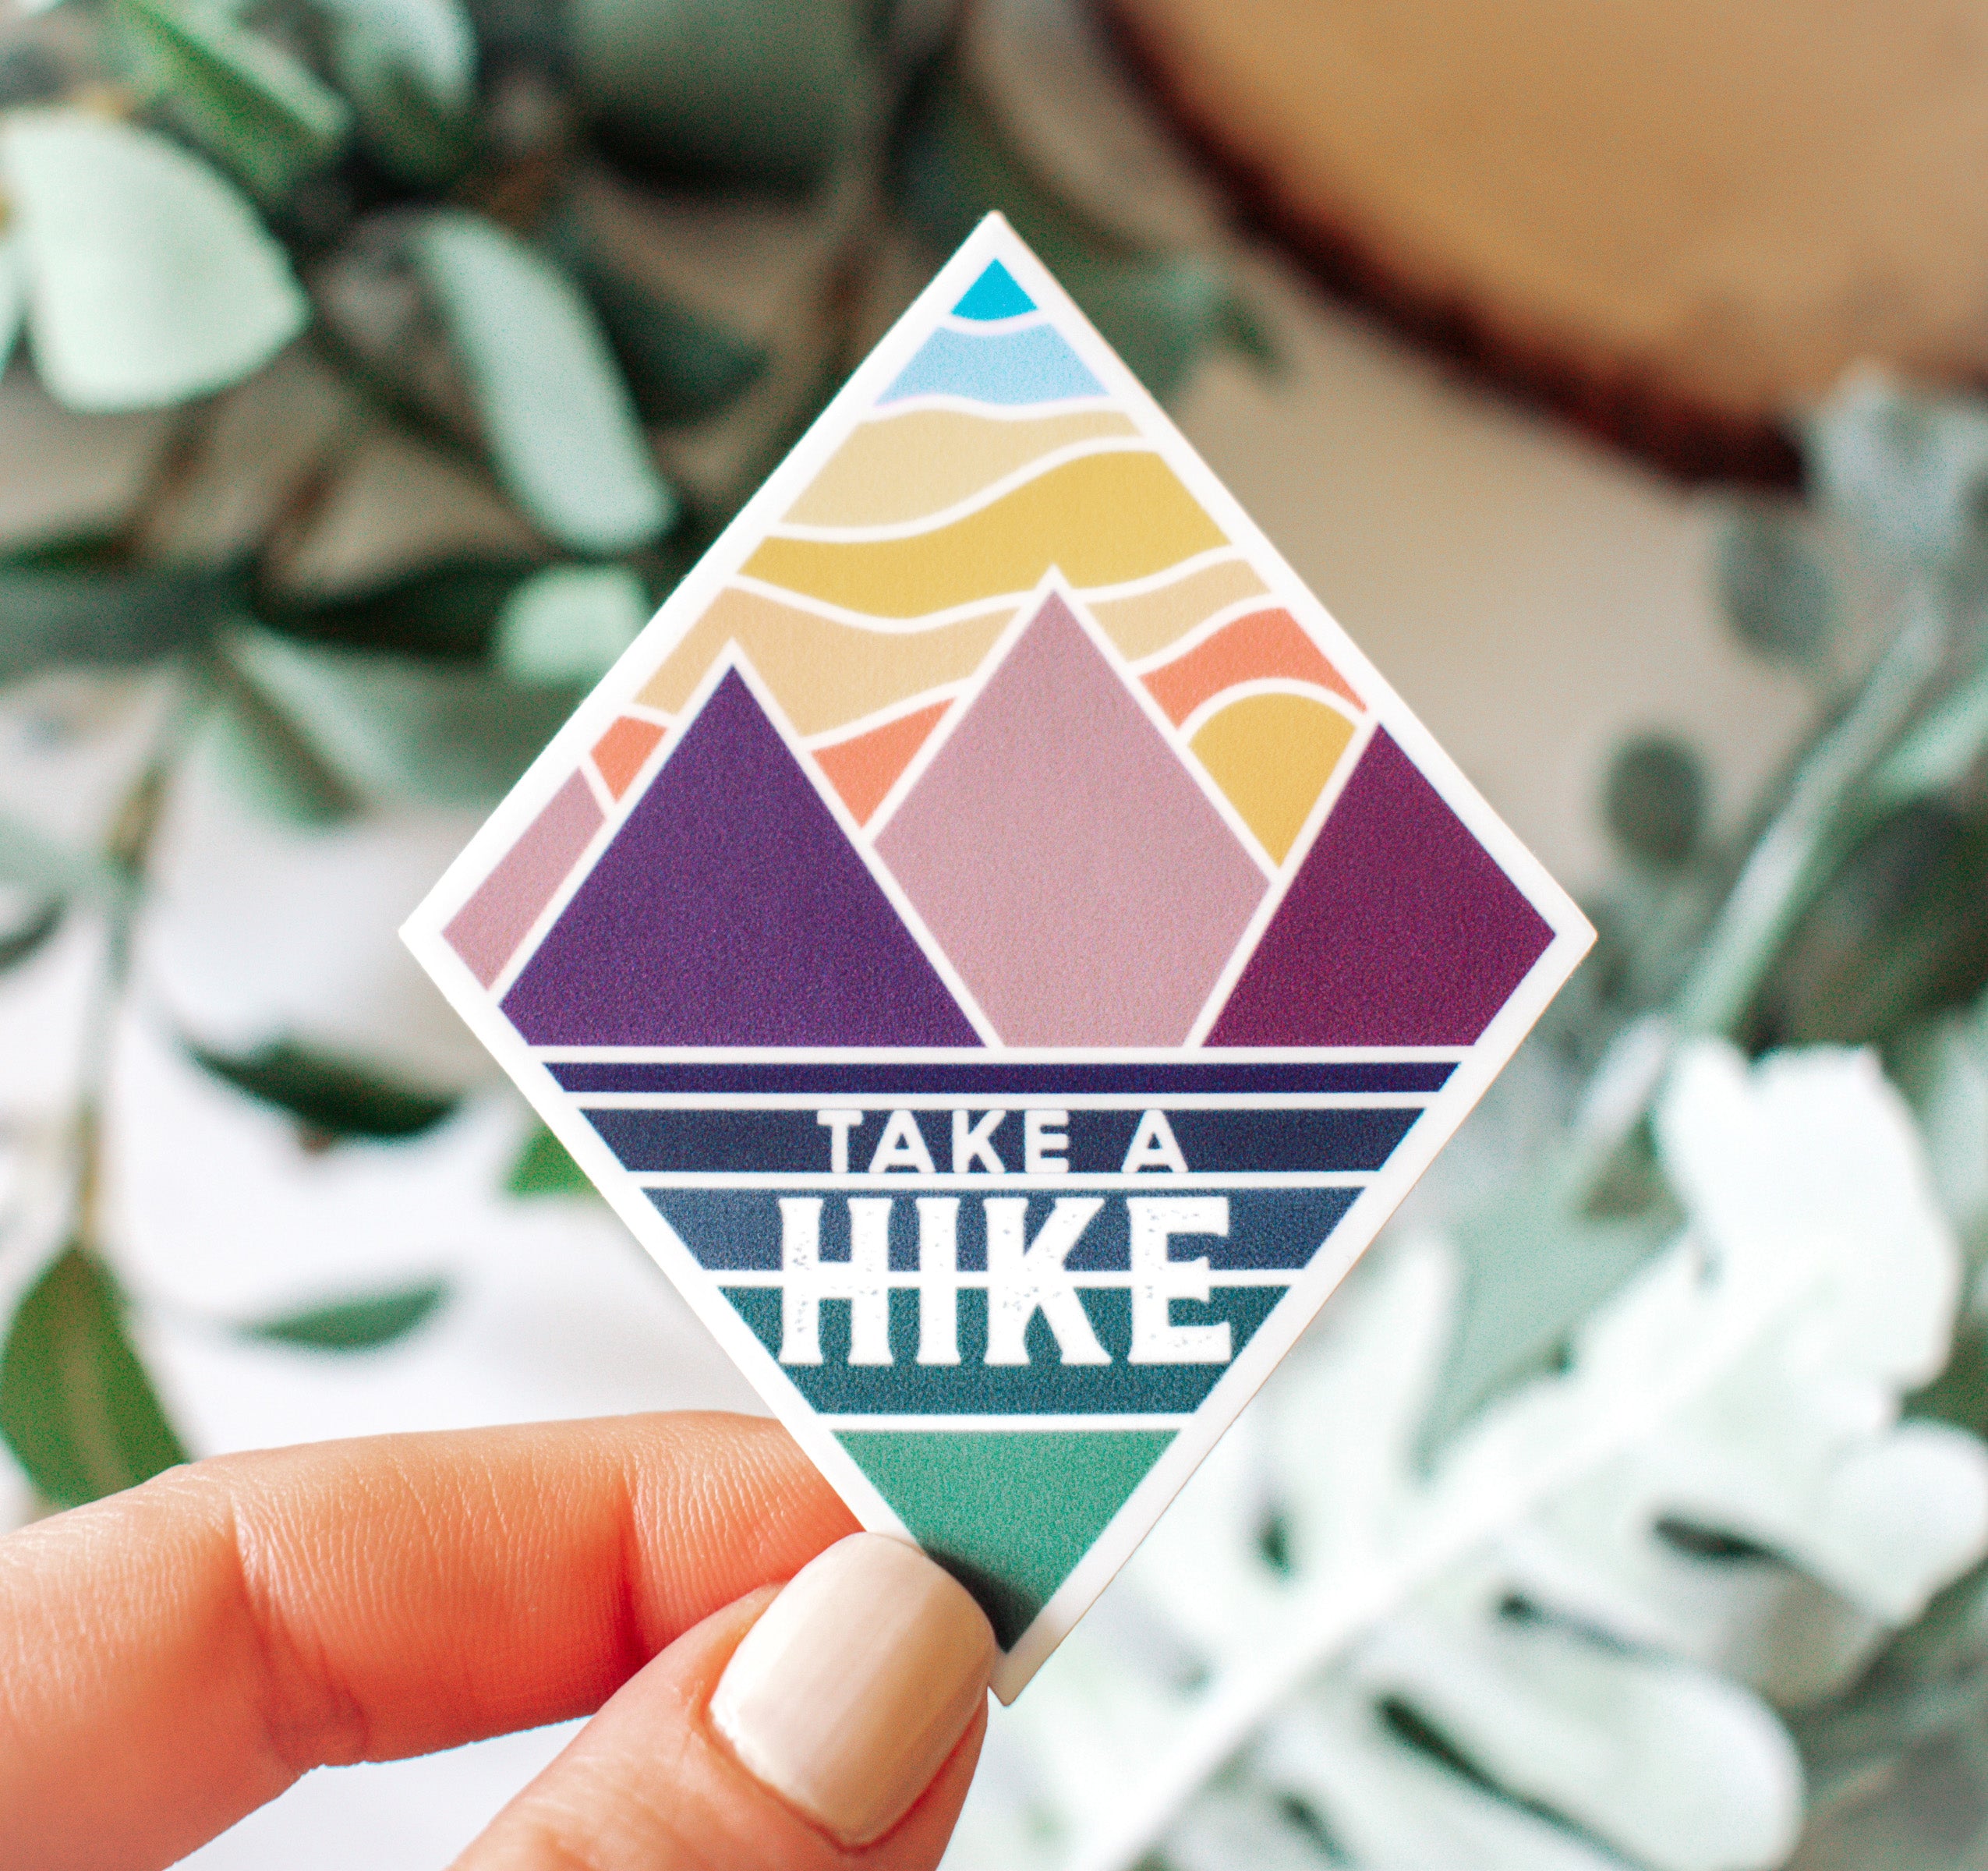 Take a hike sticker with mountains at sunset